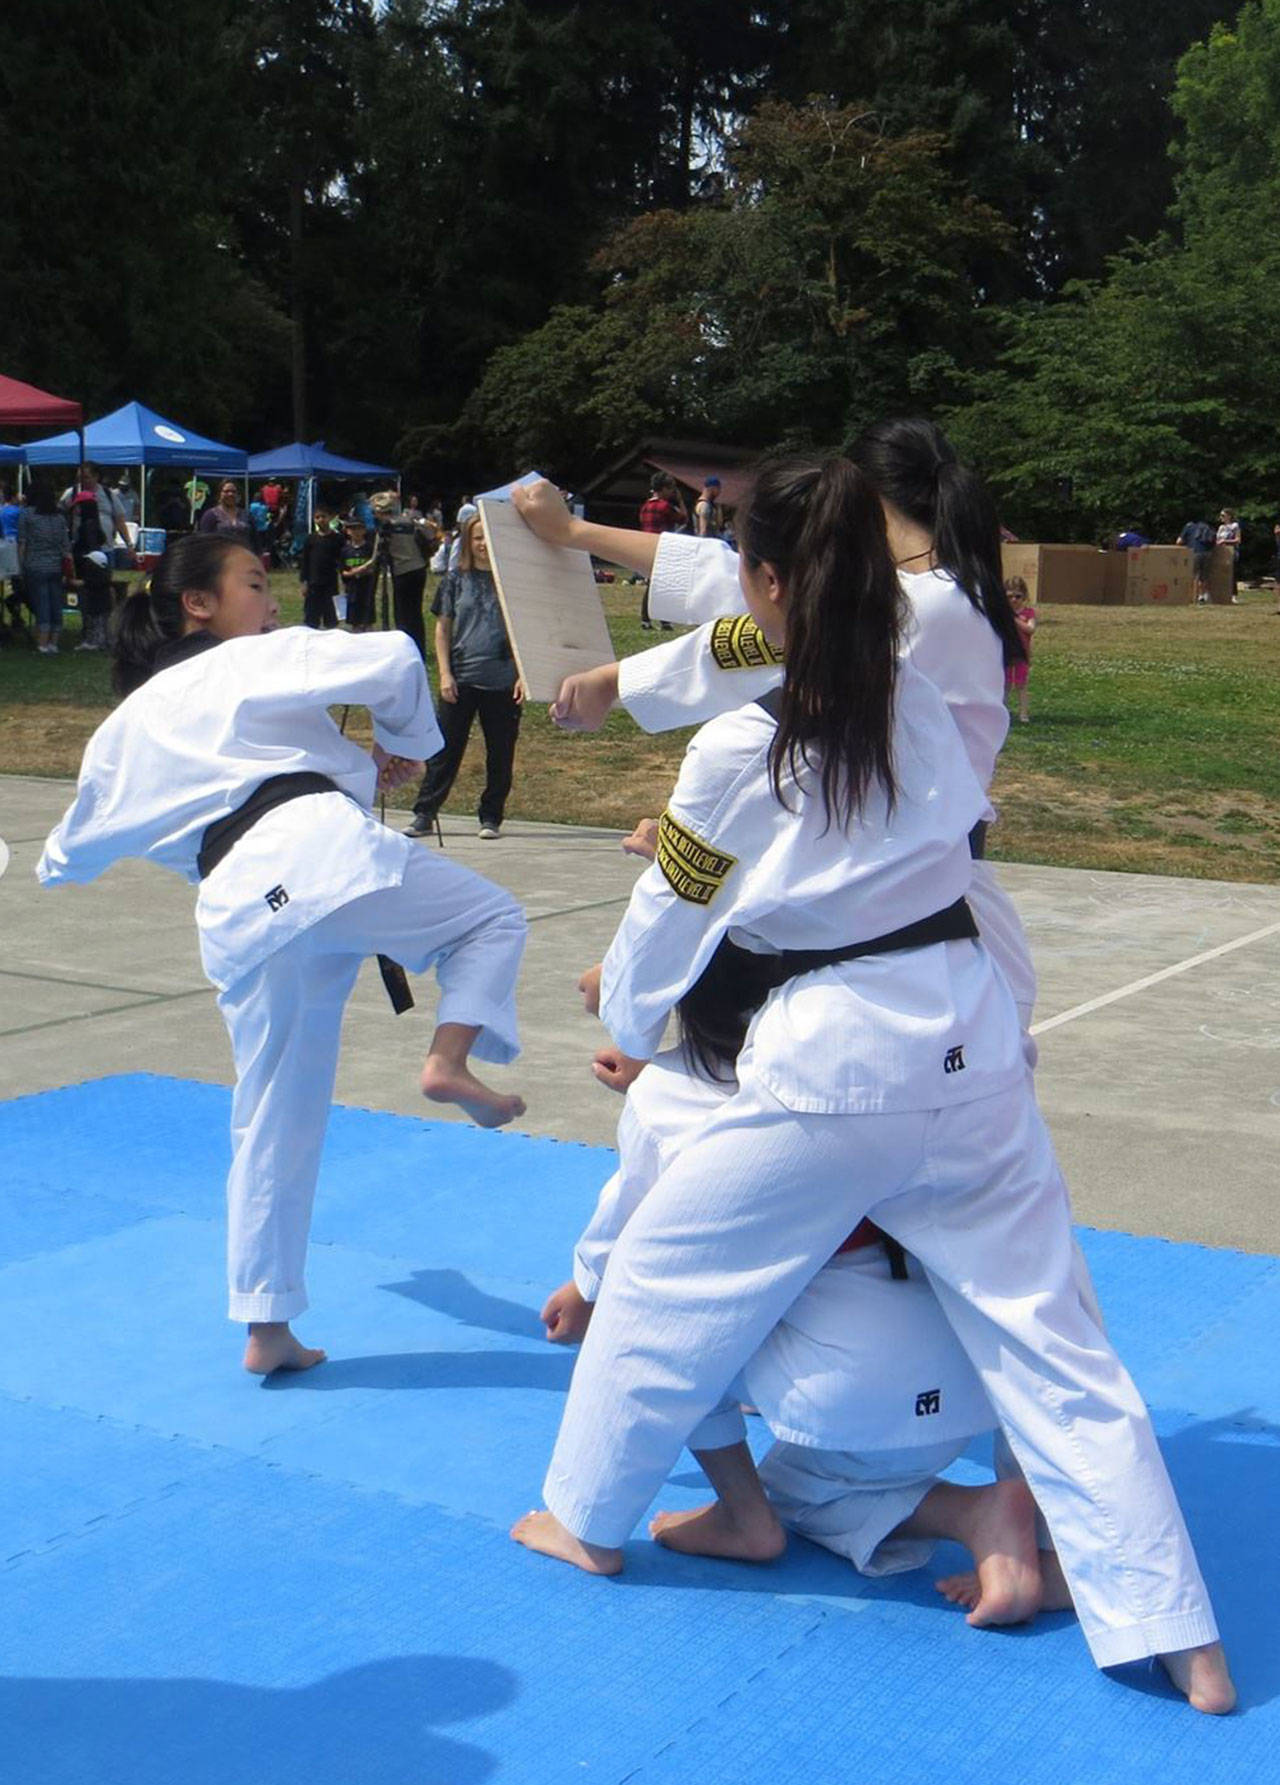 Kenmore Play Day features dancing, martial arts, football and more